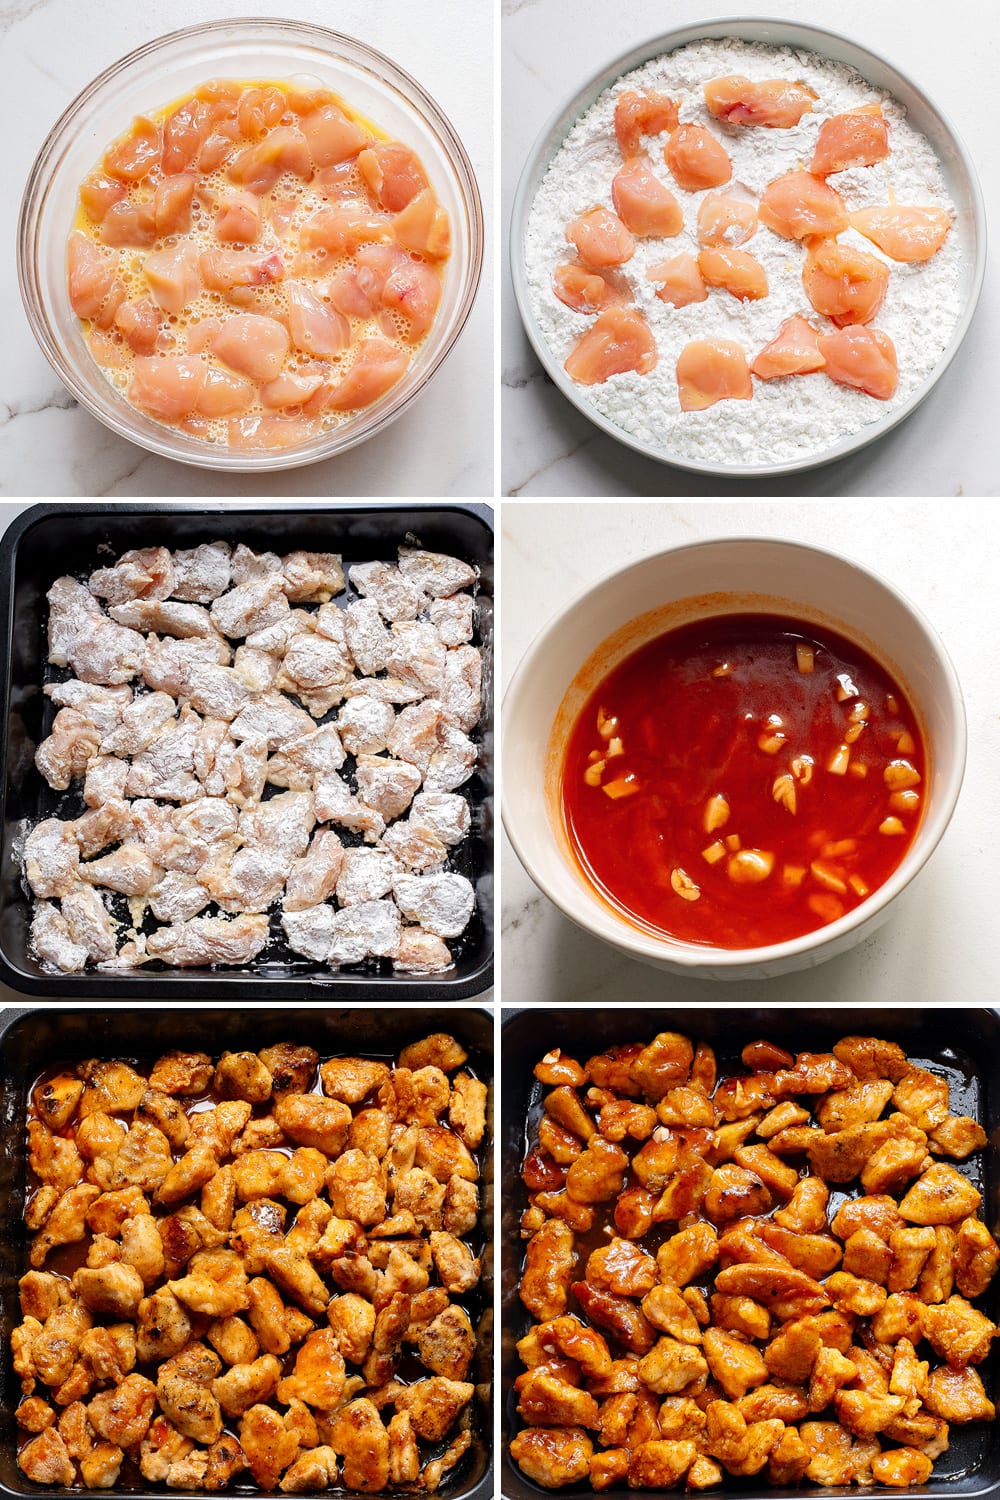 How to make honey sriracha chicken bites in the oven step by step